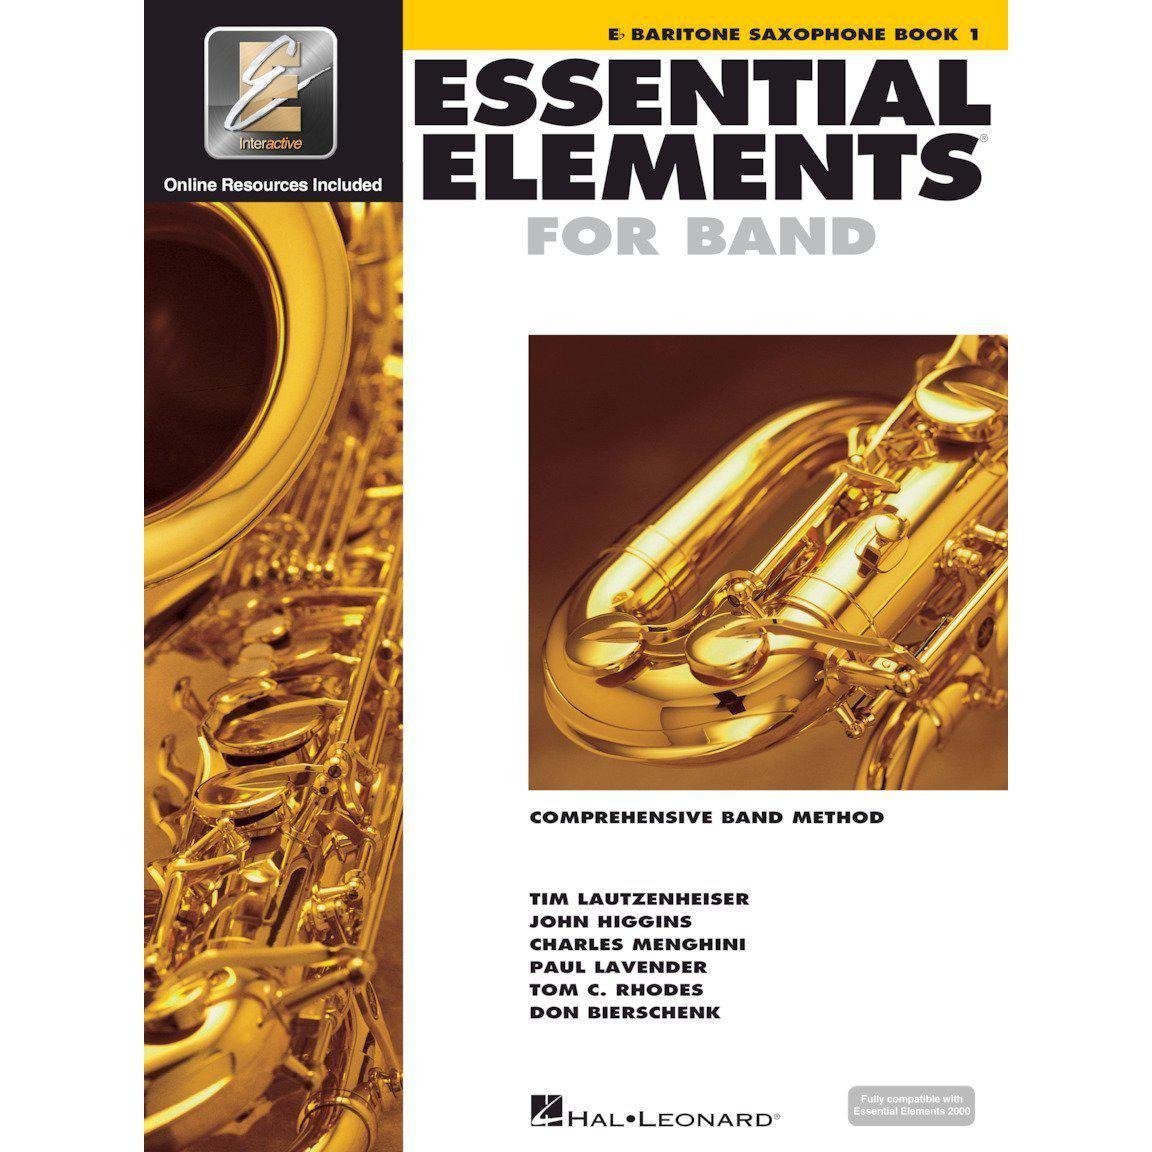 Essential Elements for Band Book 1 – Andy's Music